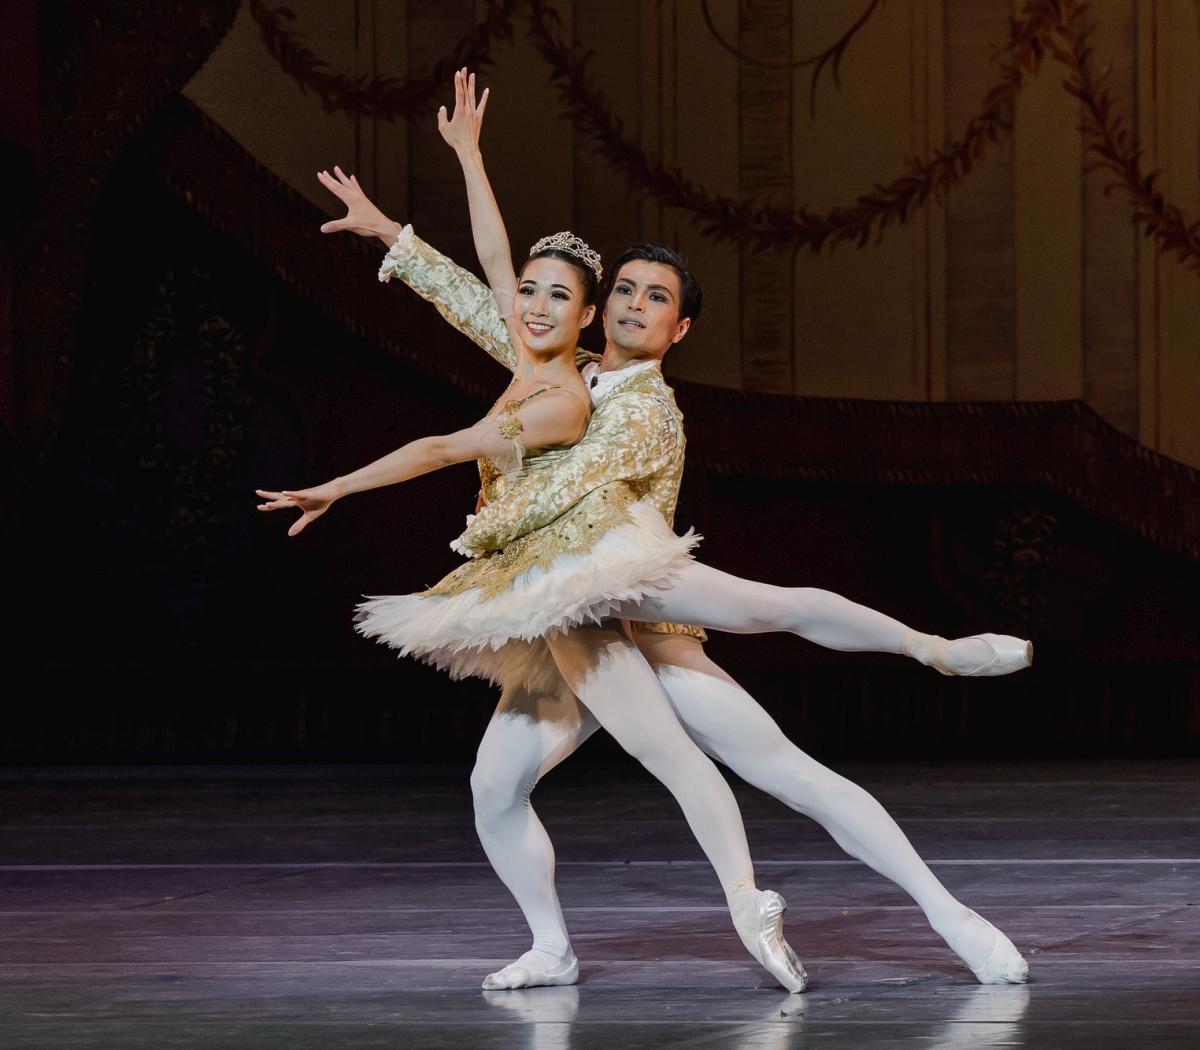 5. M.Takamori (Marie) and R.Morimoto (Prince), “The Nutcracker” by W.Eagling and T.Solymosi, “Ildikó Pongor 70 Ballet Gala”, Hungarian National Ballet 2023 © A.Nagy / Hungarian State Opera 